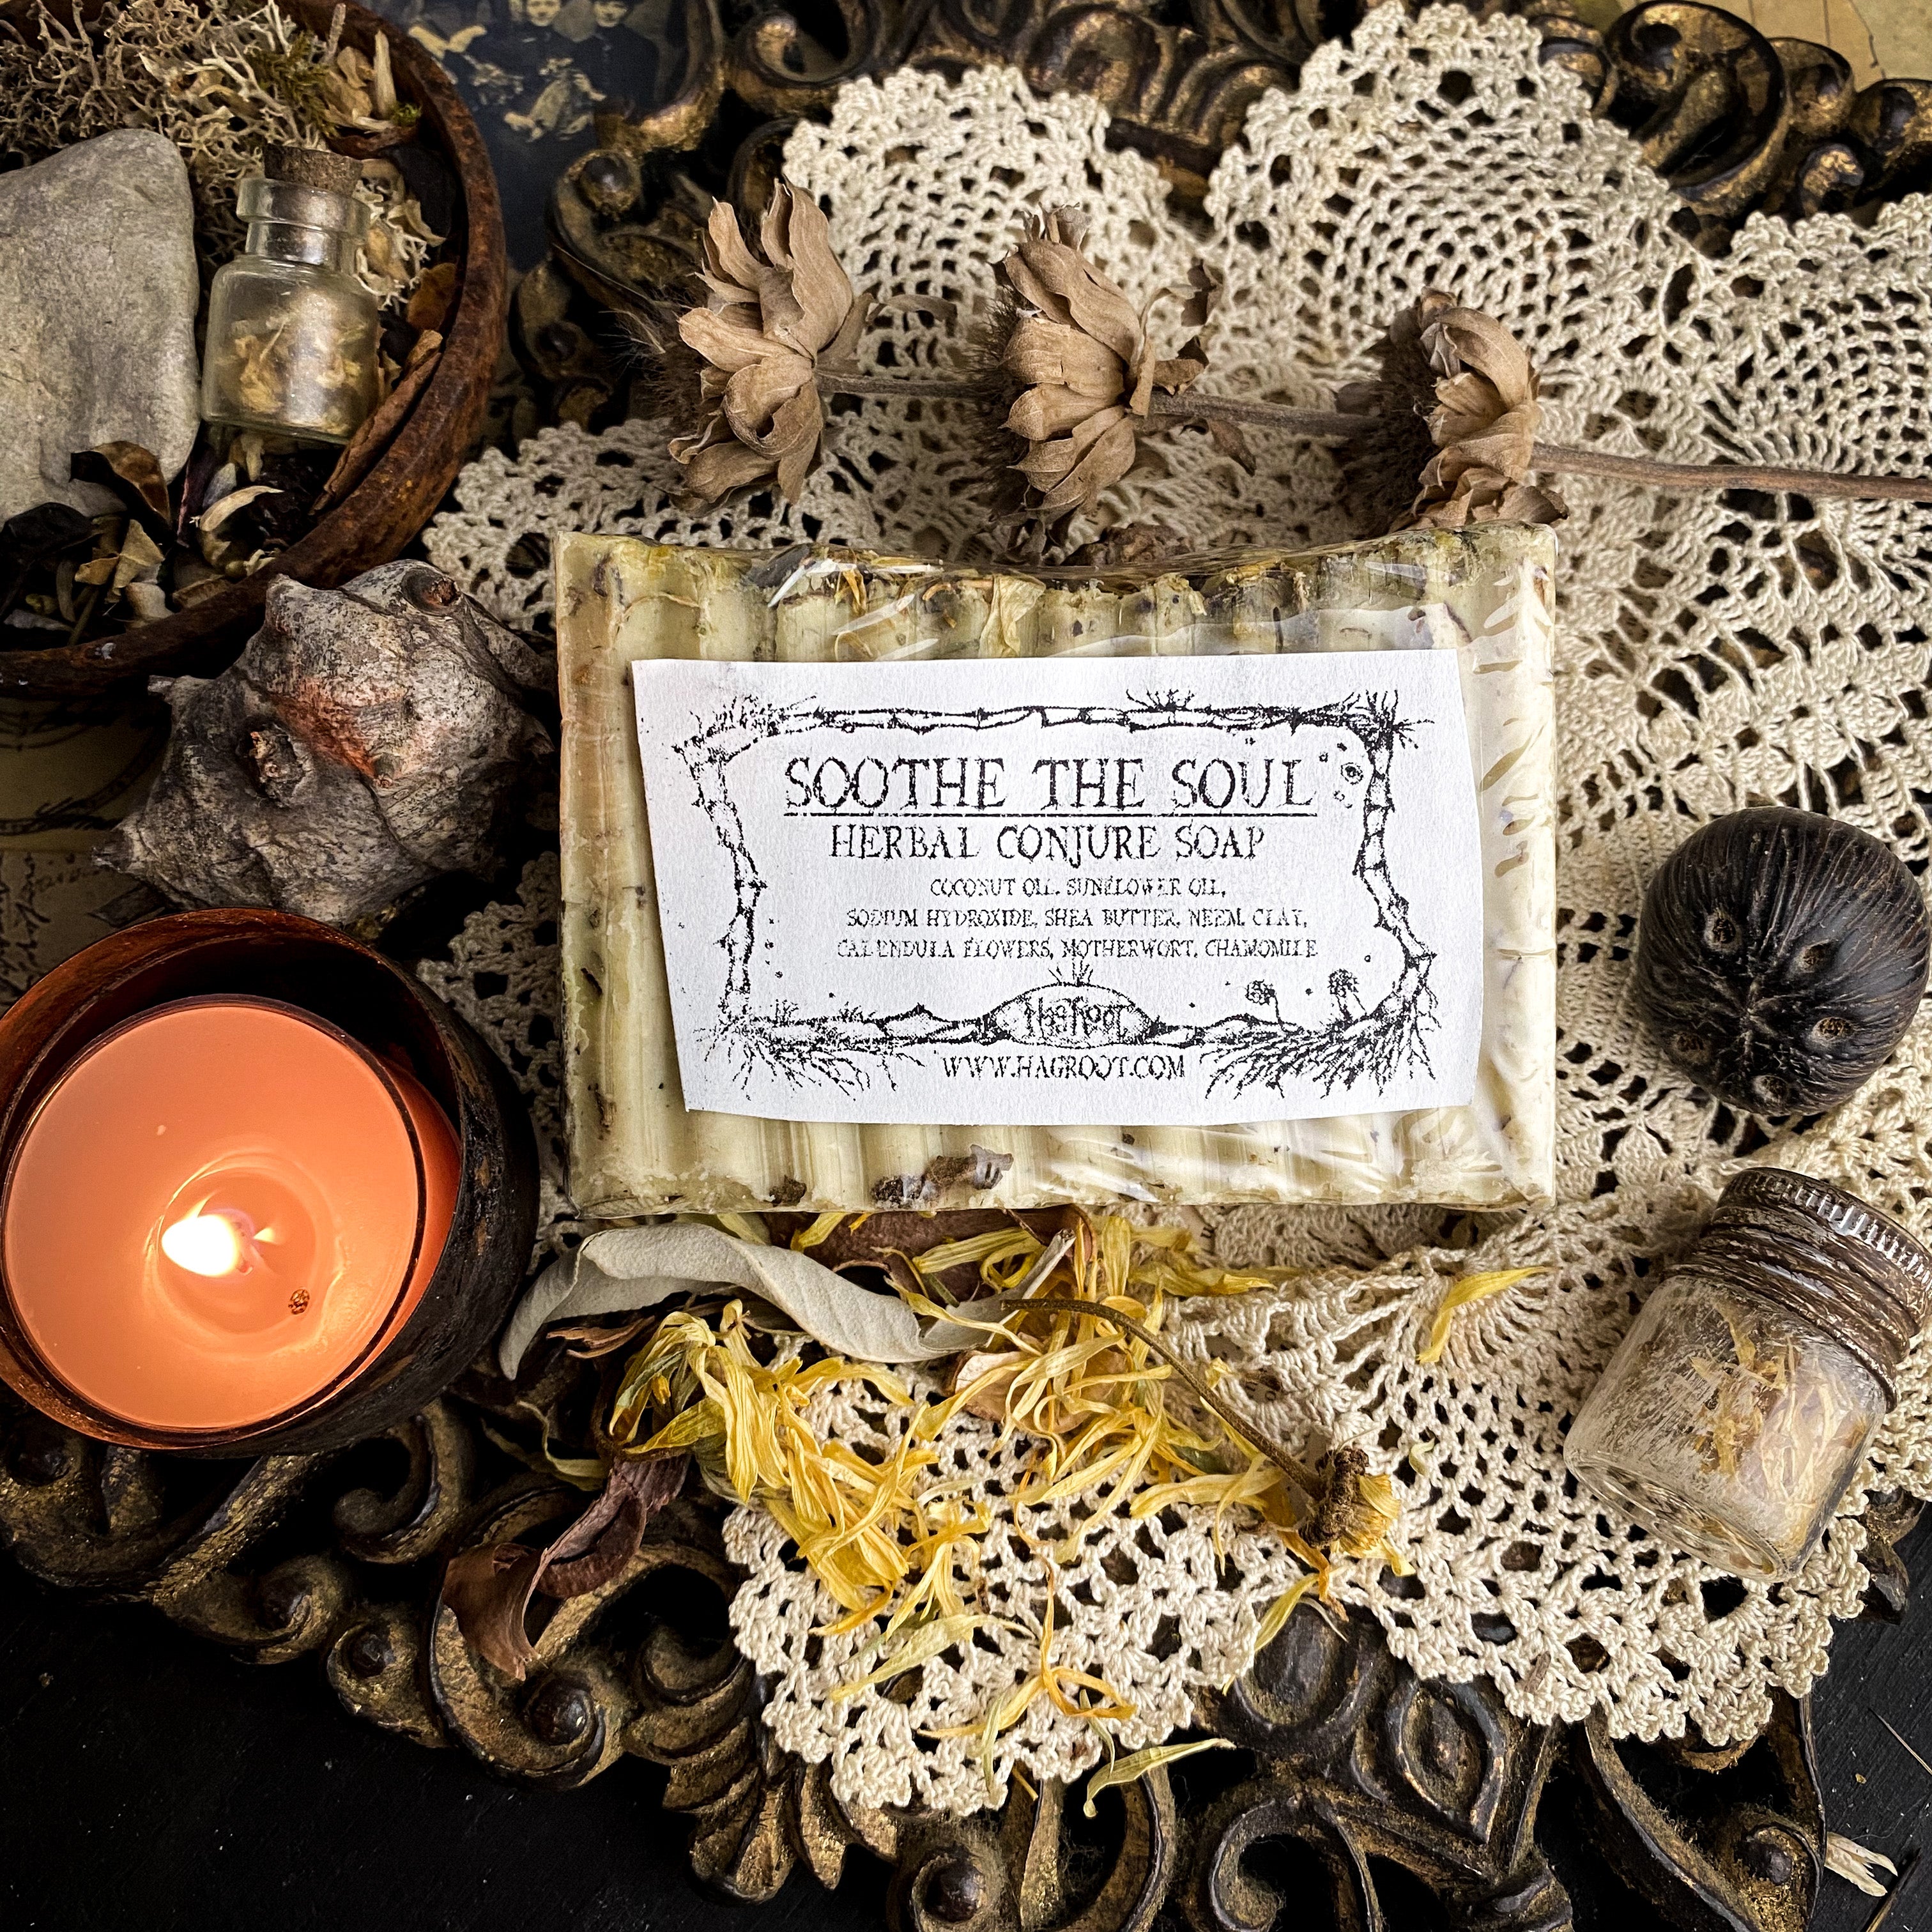 Soothe the Soul - Herbal Conjure Soap